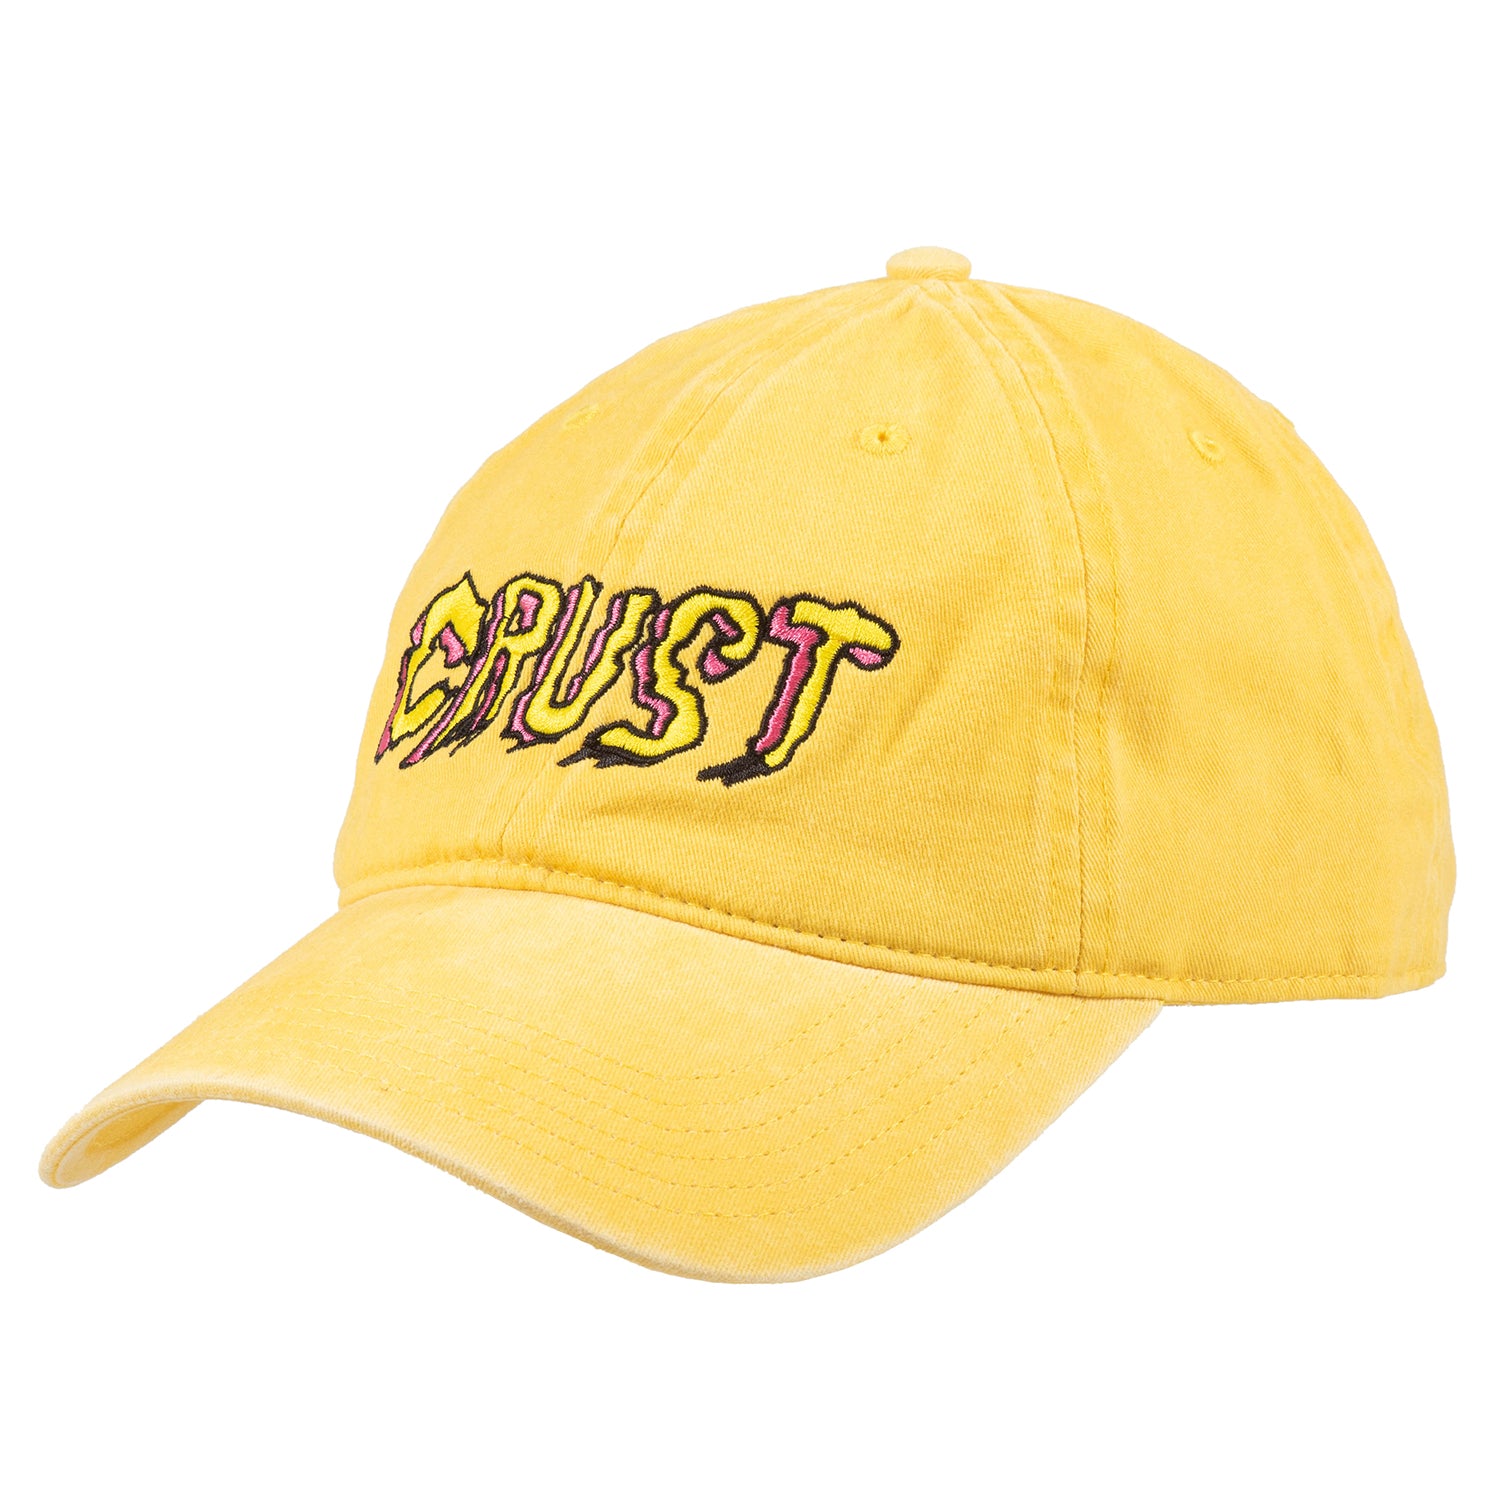 CRUST BIKES Embroidered Hats